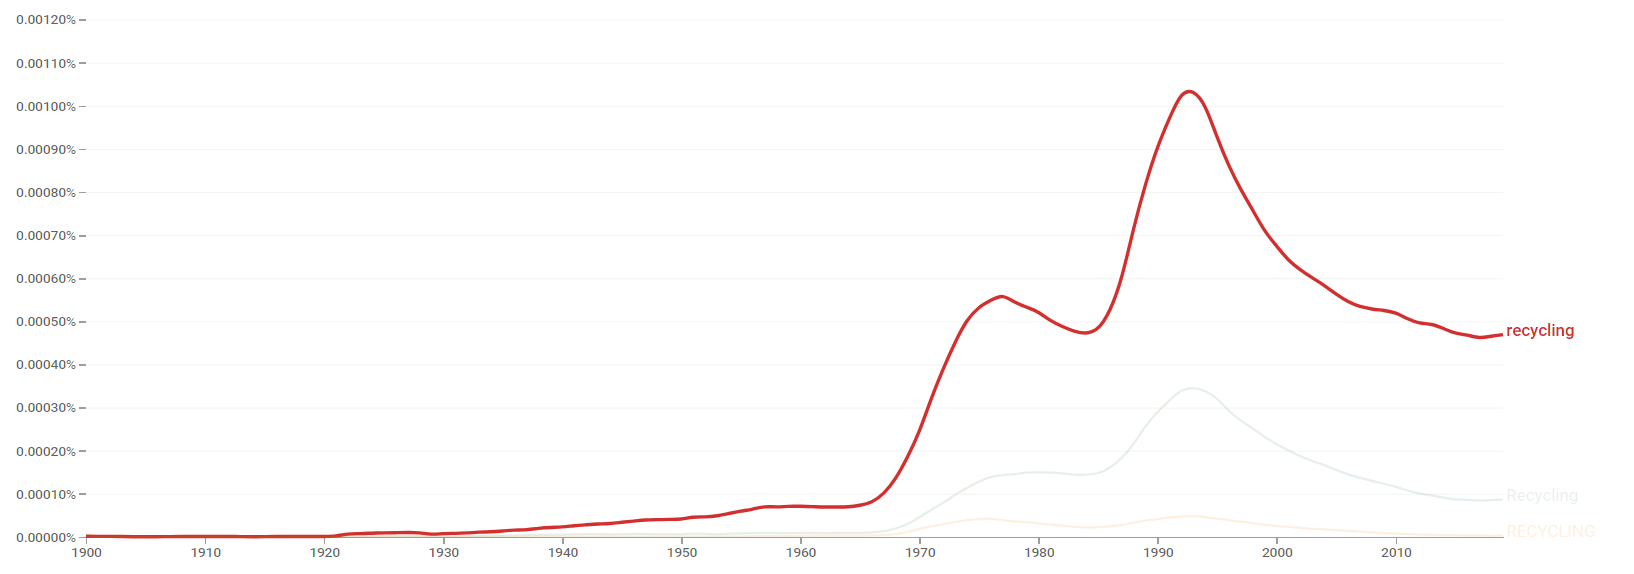 Recycling ngram.png